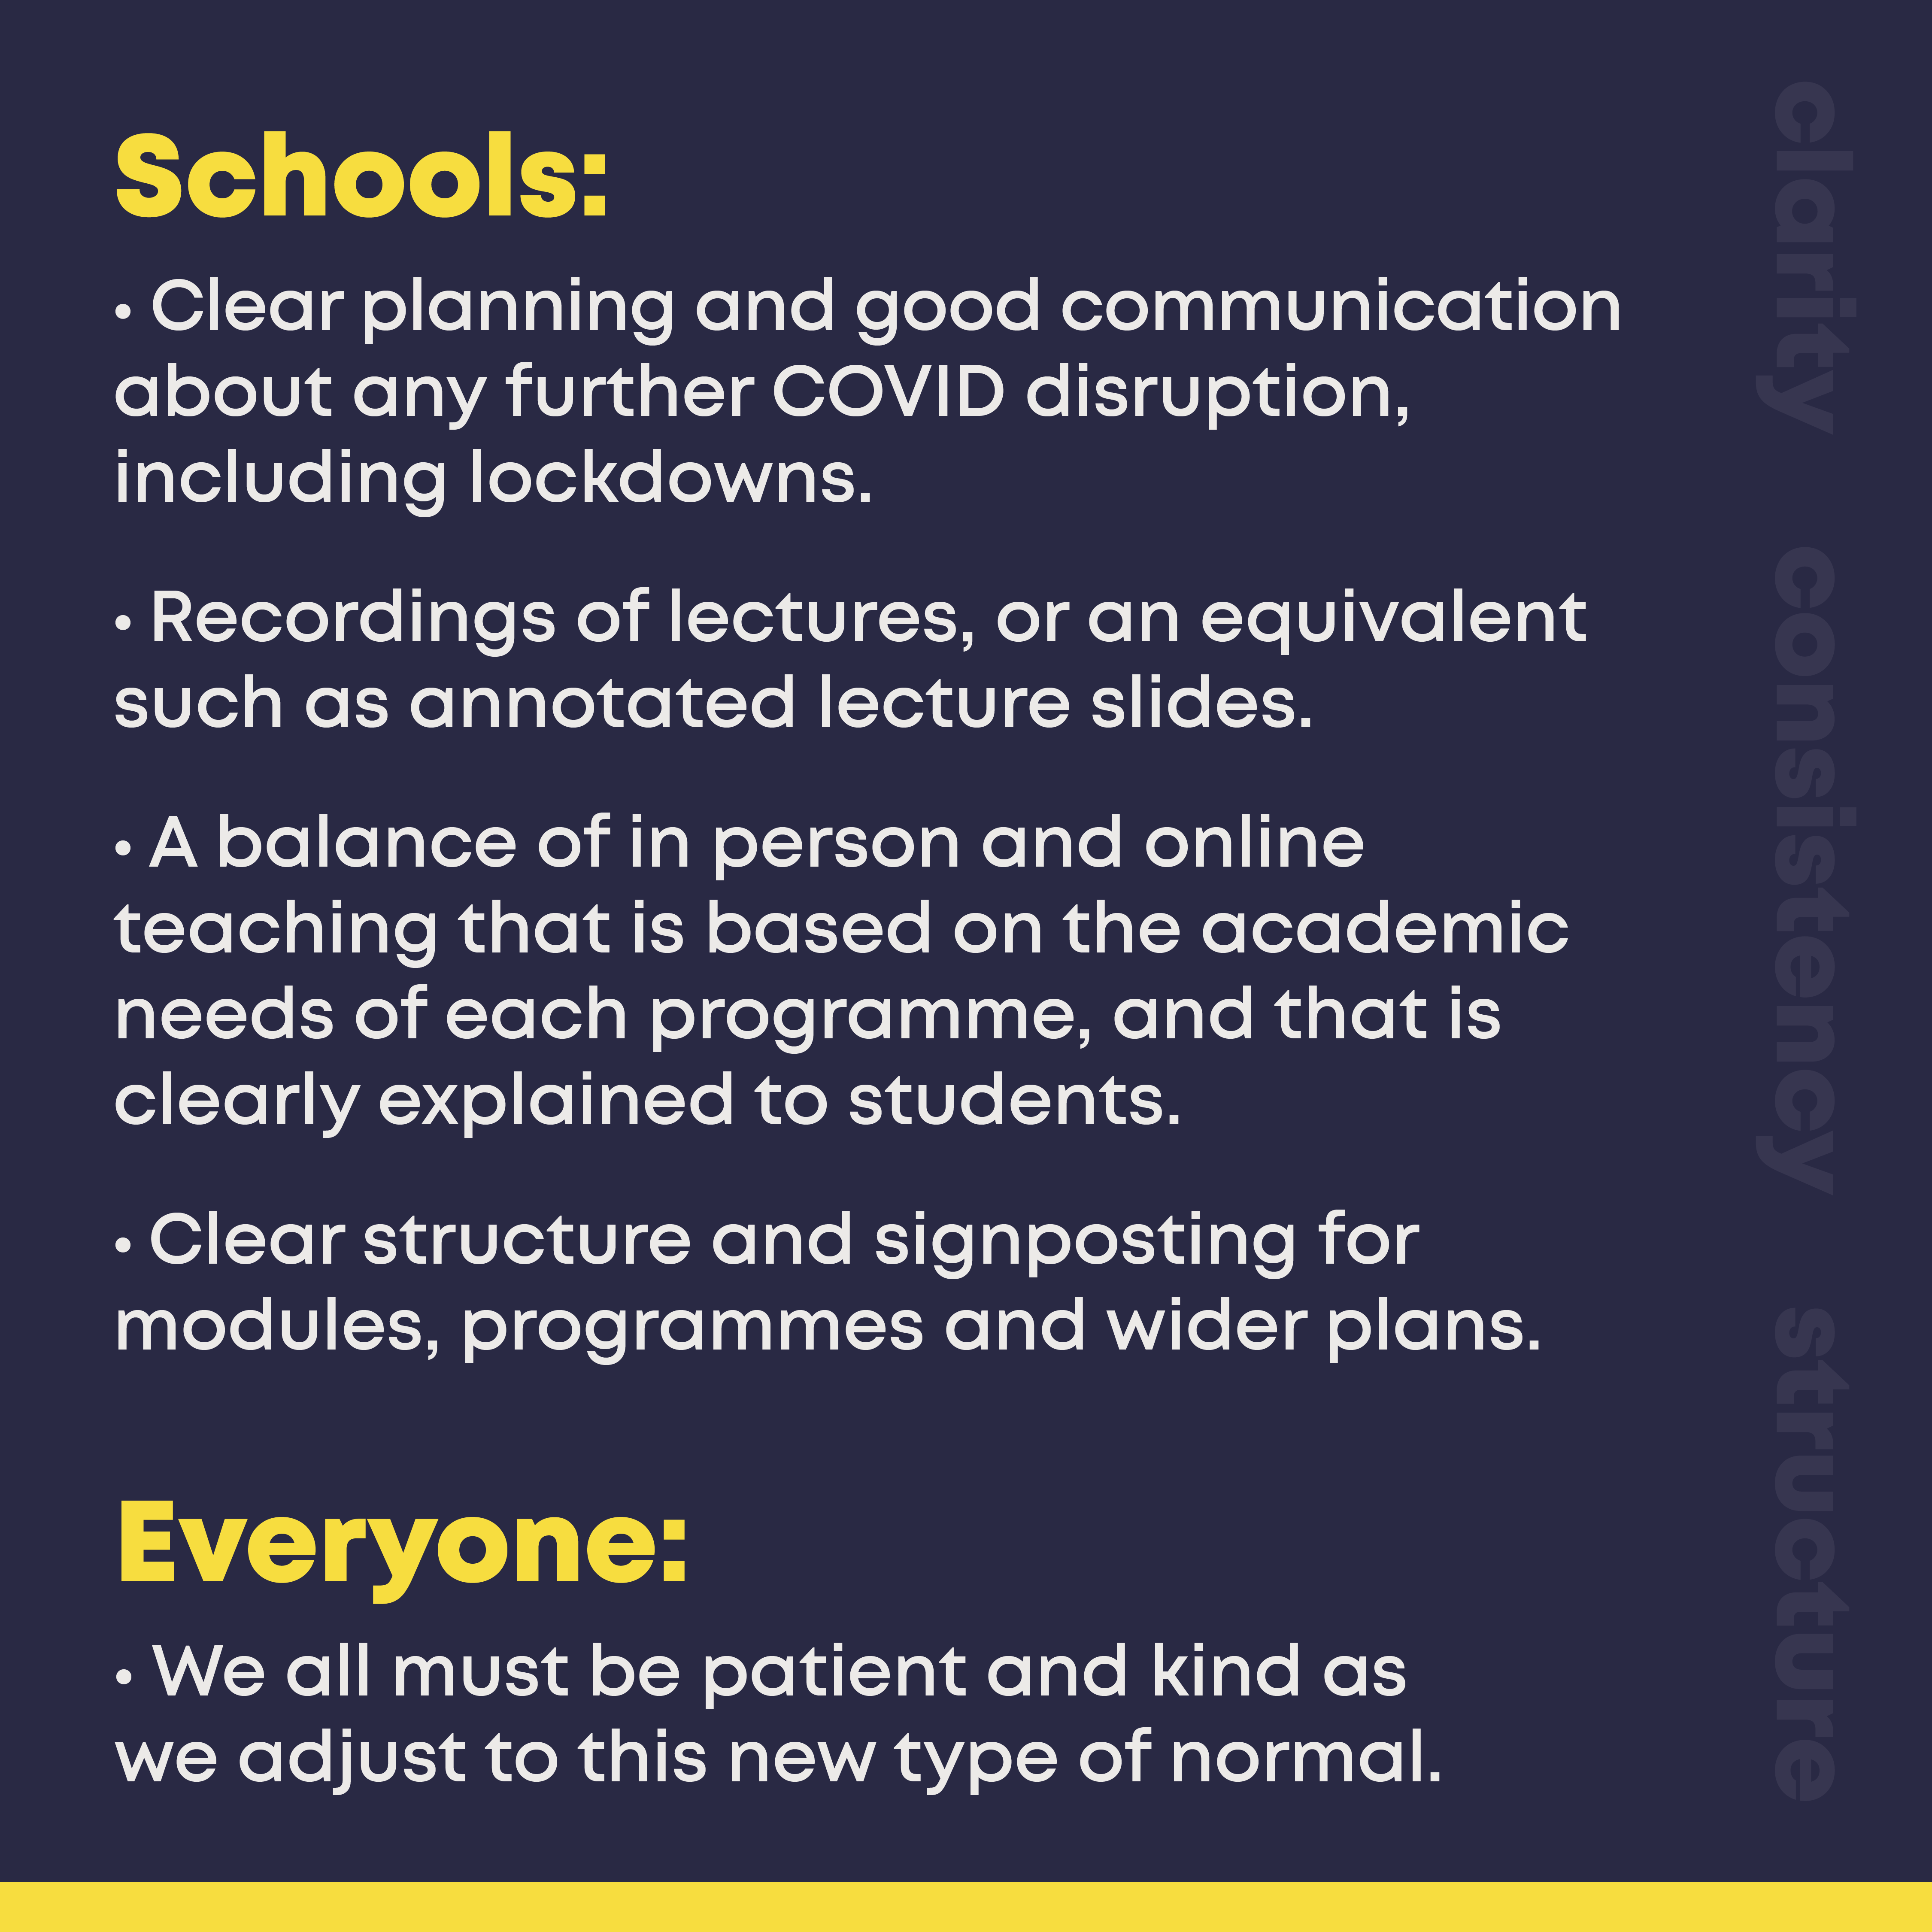 Schools:  • Clear planning and good communication about any further COVID disruption, including lockdowns. • Recordings of lectures, or an equivalent such as annotated lecture slides. • A balance of in person and online teaching that is based on the academic needs of each programme, and that is clearly explained to students. • Clear structure and signposting for modules, programmes and wider plans. Everyone:  • We all must be patient and kind as we adjust to this new type of normal.